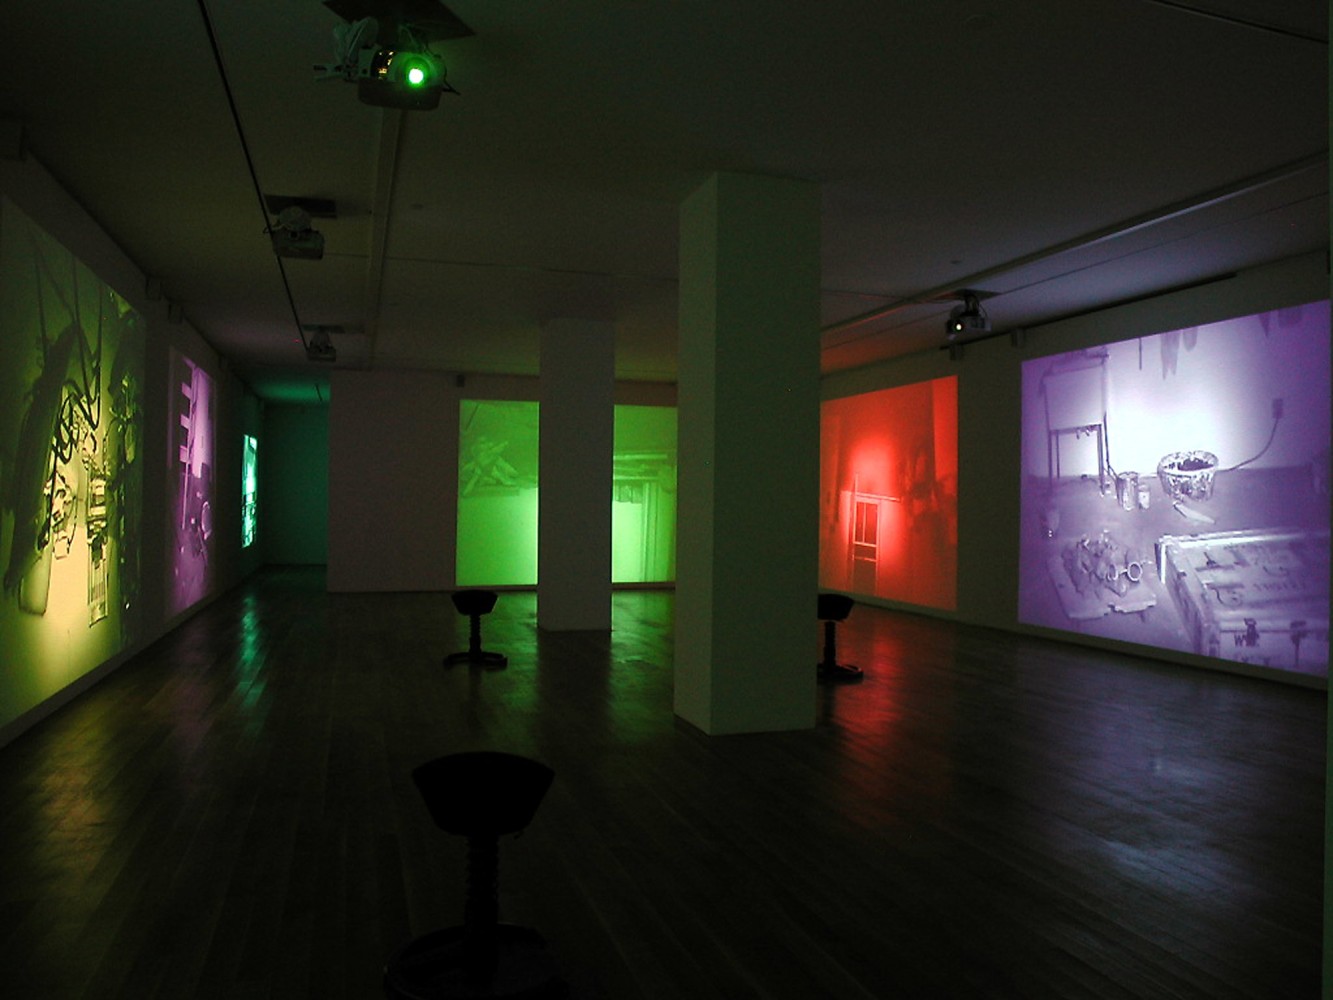 Bruce Nauman
MAPPING THE STUDIO II with color shift, flip, flop, &amp;amp; flip/flop (Fat Chance John Cage), 2001
7 channel video installation (color, sound)
7 DVDs, 7 DVD players, 7 projectors, 7 pairs of speakers
05:45:00 min.
dimensions variable
SW 02001
Collection of Tate, London;&amp;nbsp;Centre Pompidou, Mus&amp;eacute;e national d&amp;#39;art moderne, Paris; and Kunstmuseum Basel